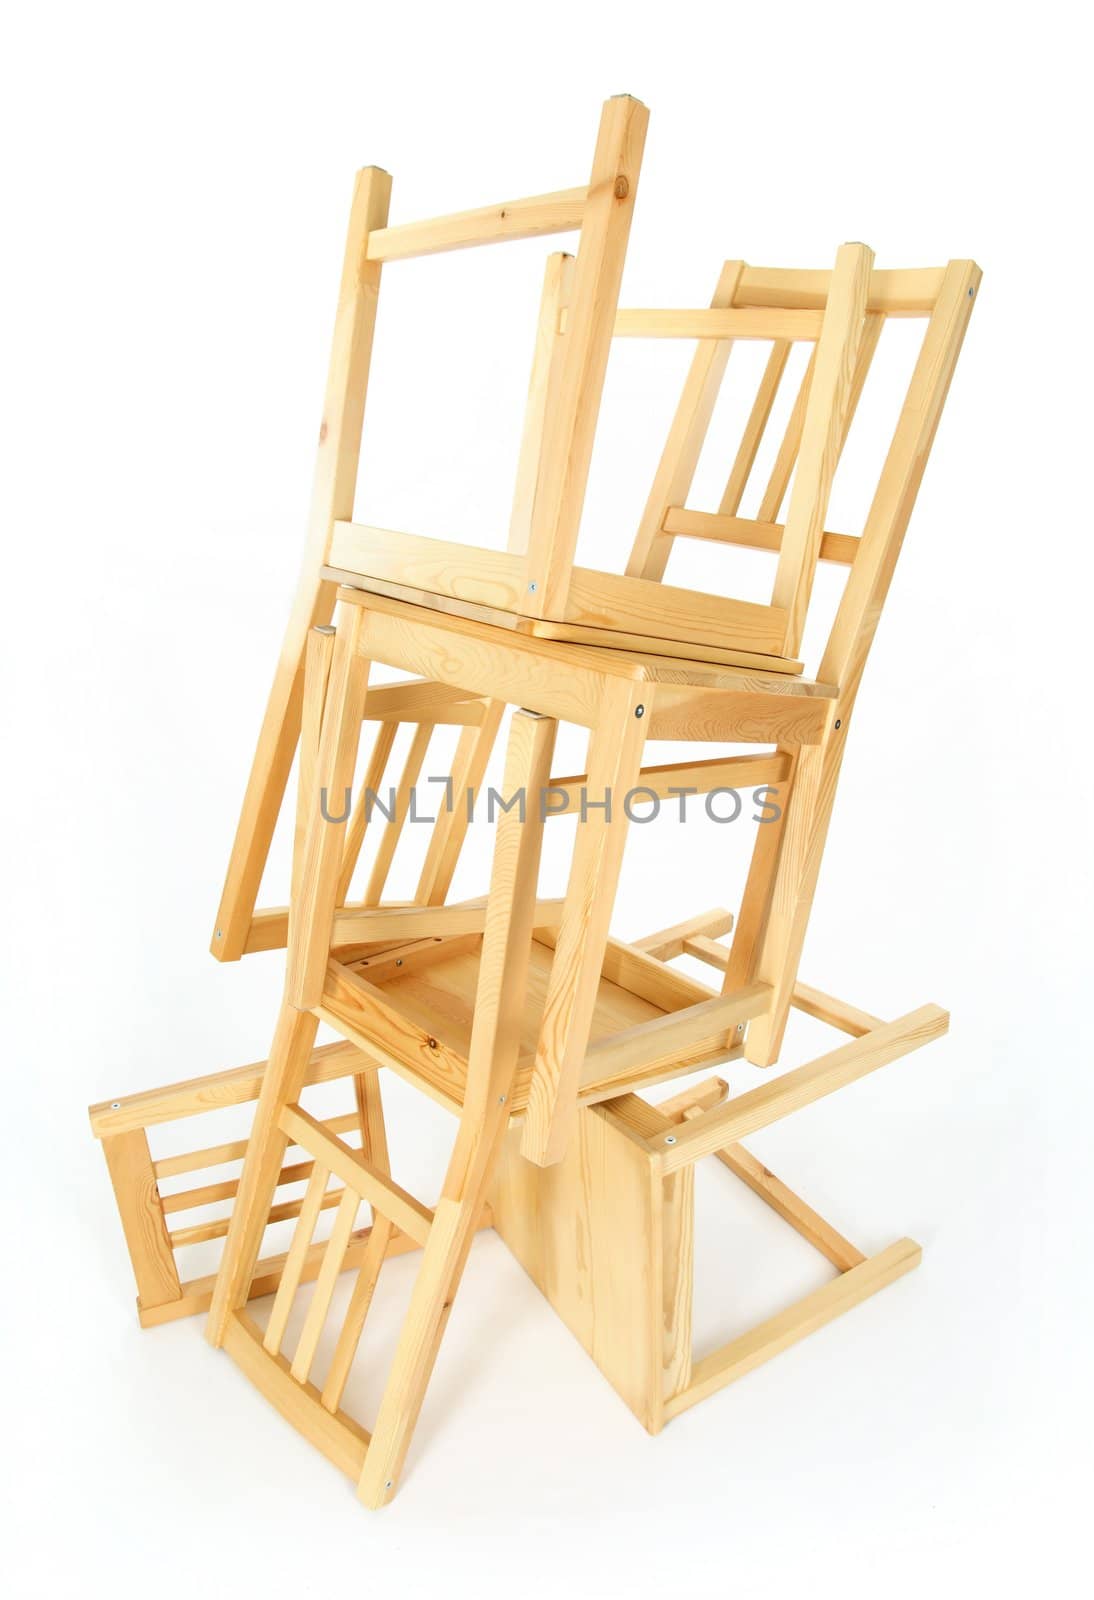 Stacked wooden chairs on white background.